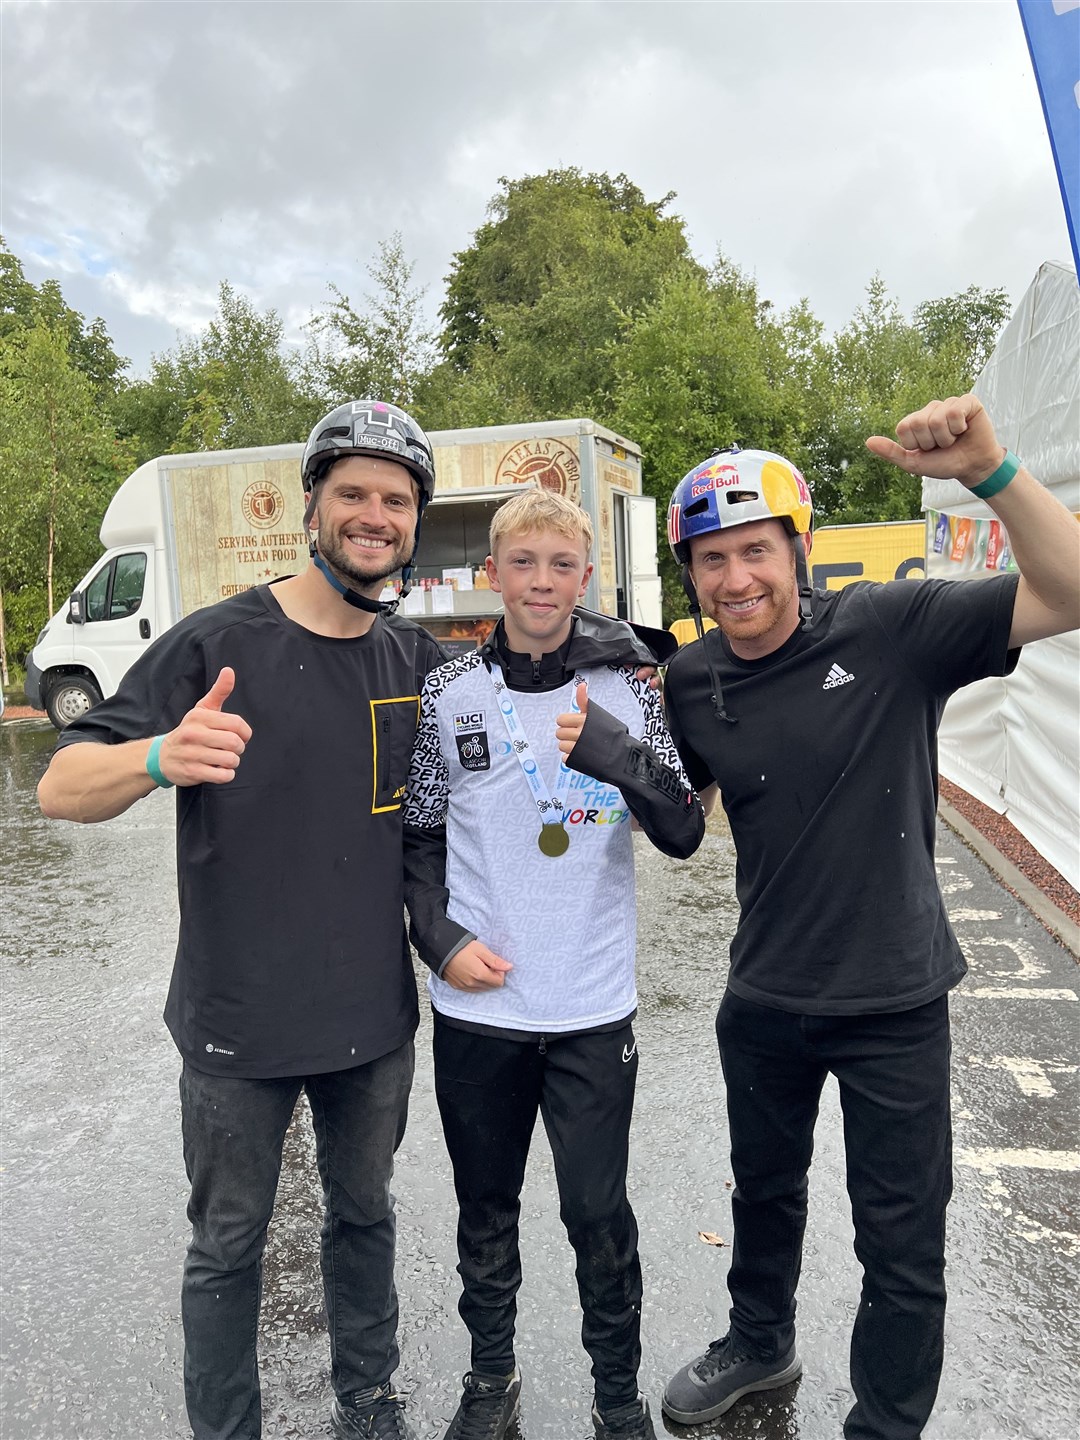 Caleb Rigg celebrates his success with legendary trial biking stars Duncan Shaw (left) and Danny MacAskill.